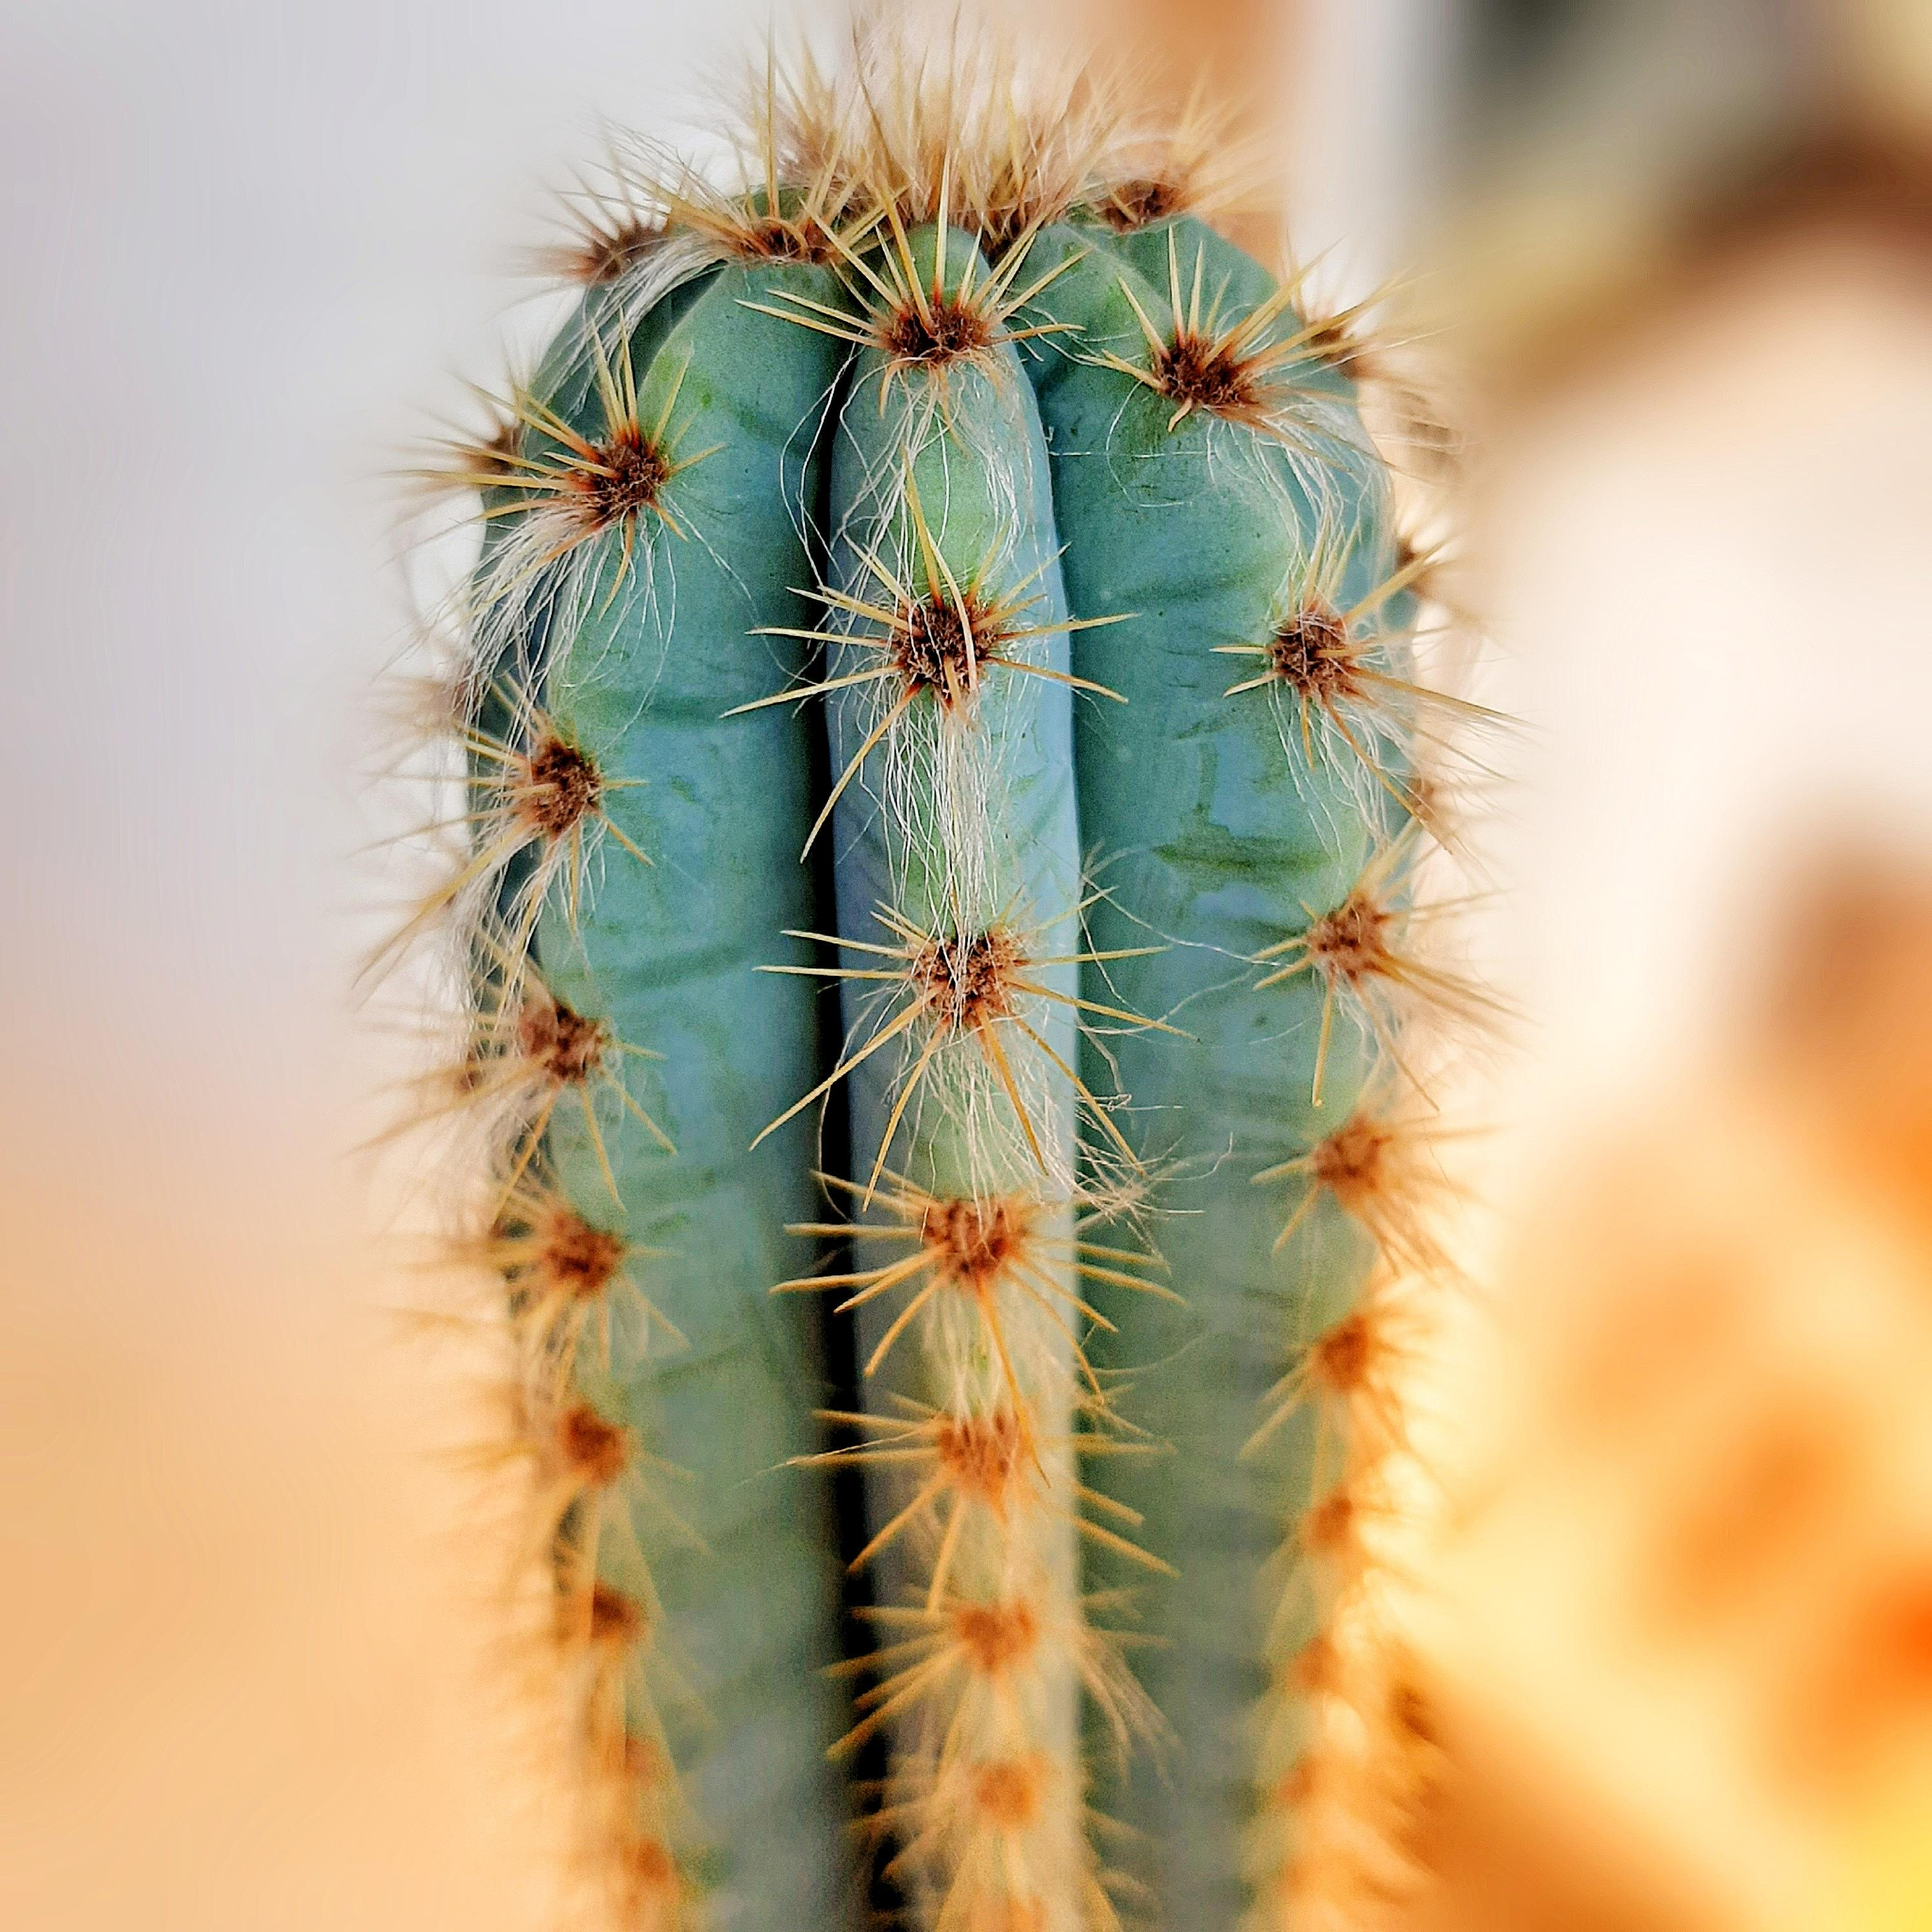 Closeup view of a blue cactus with bright orange spines.